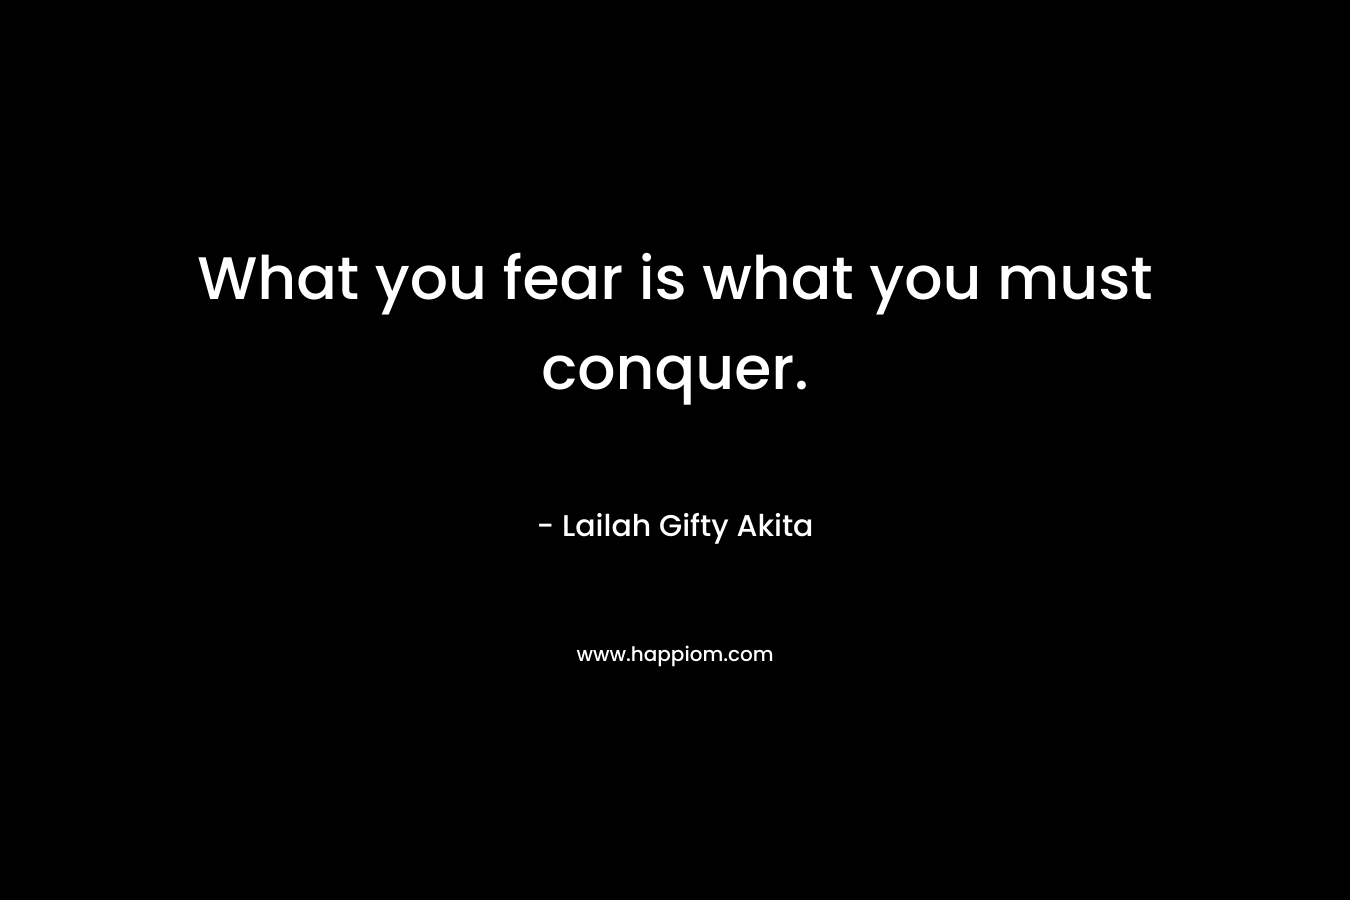 What you fear is what you must conquer.